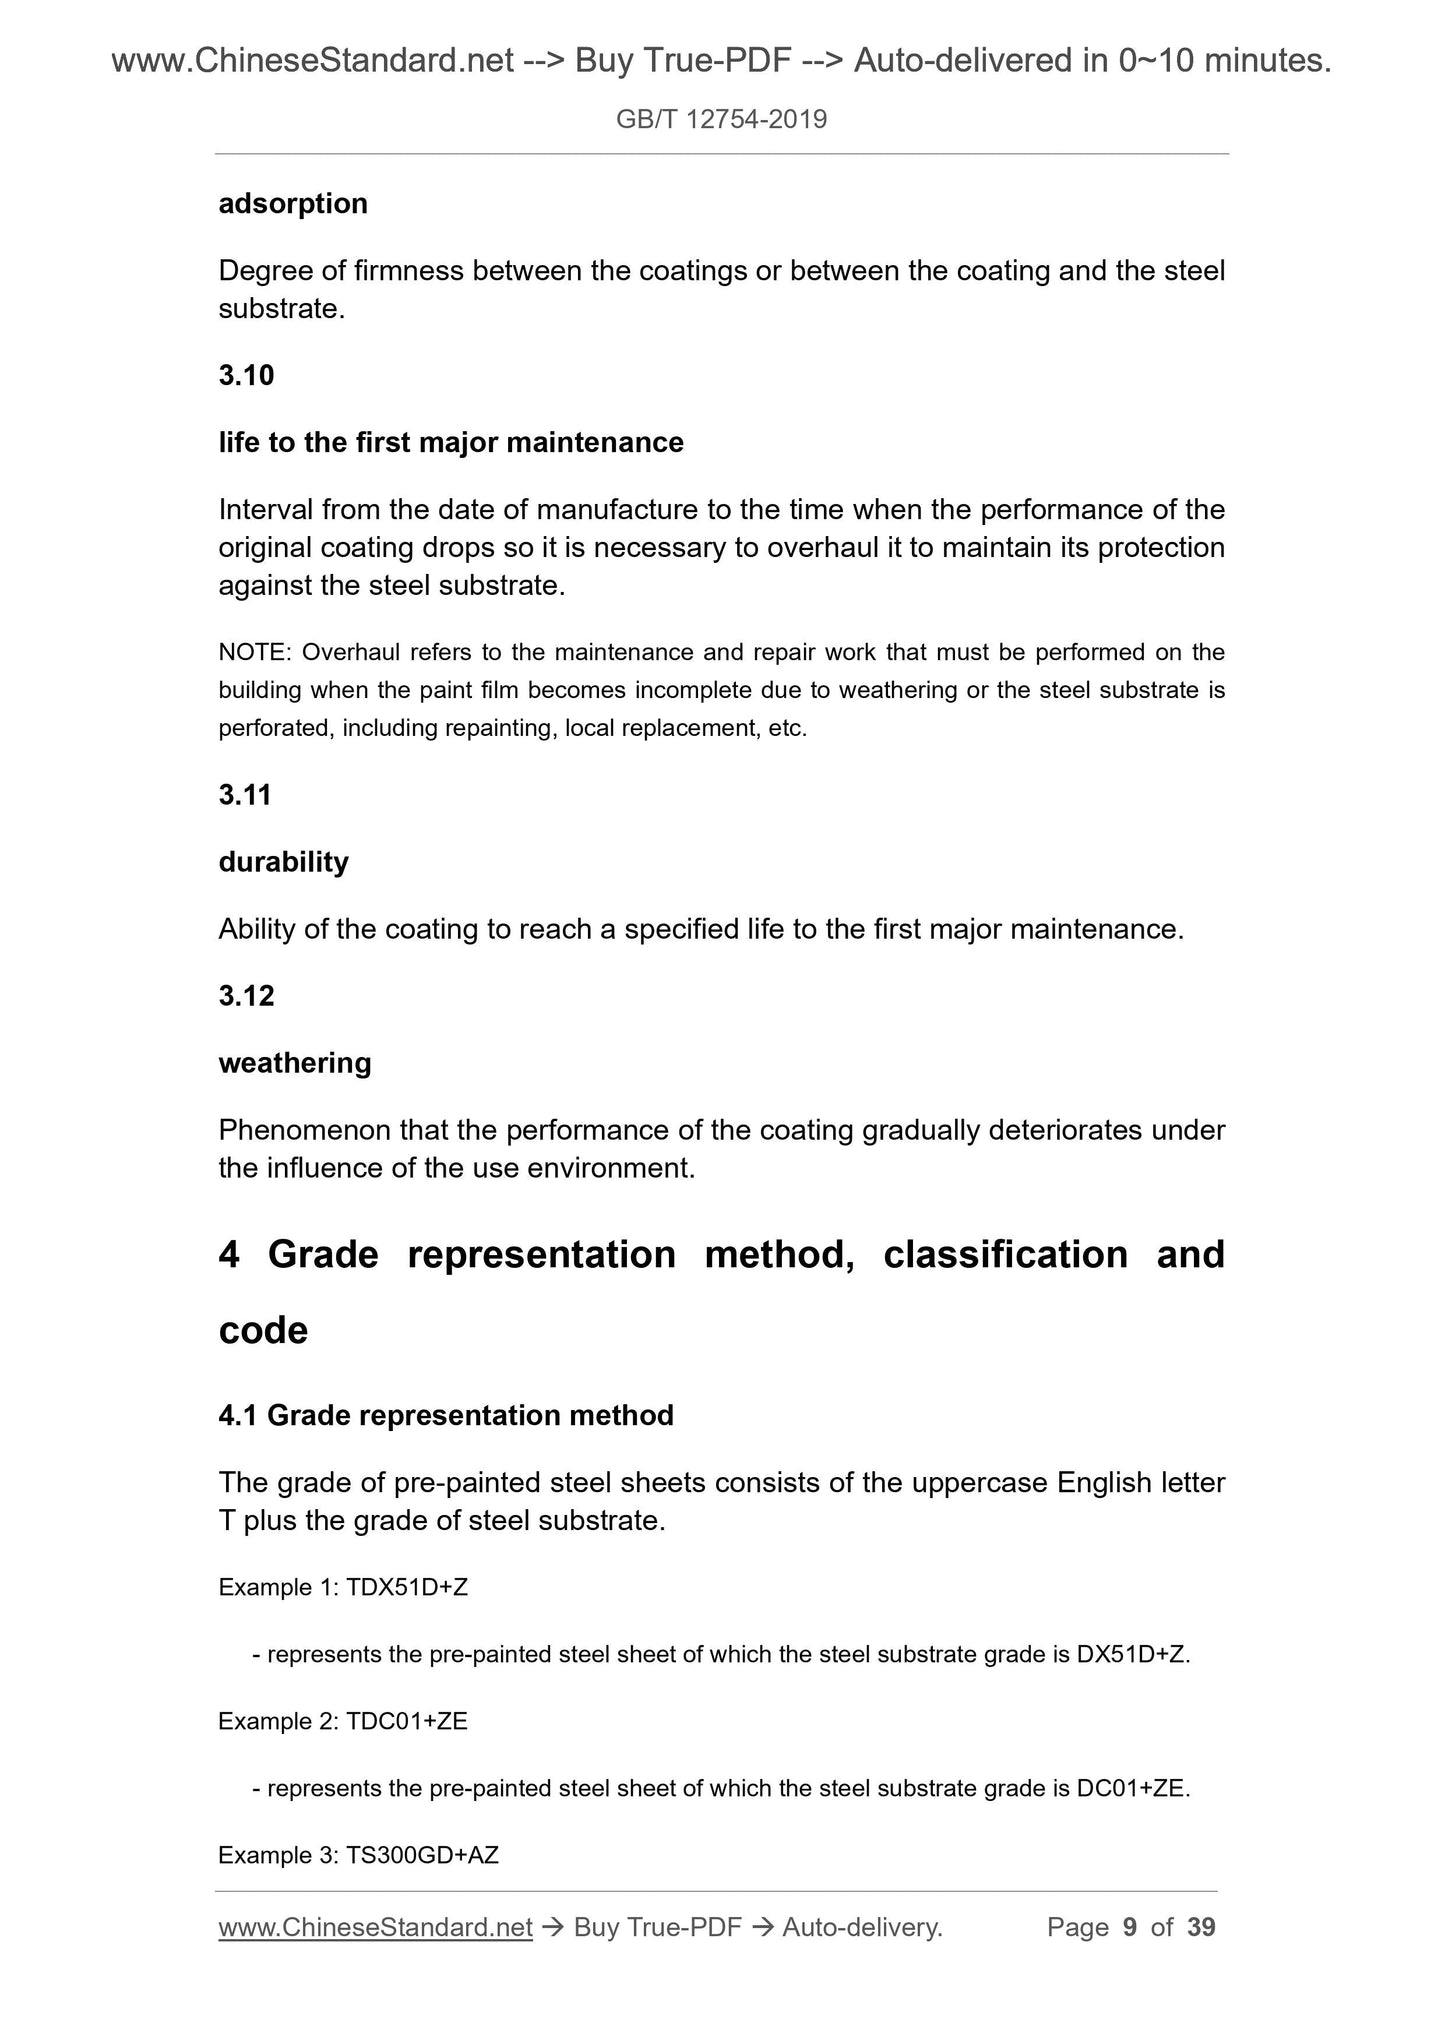 GB/T 12754-2019 Page 5